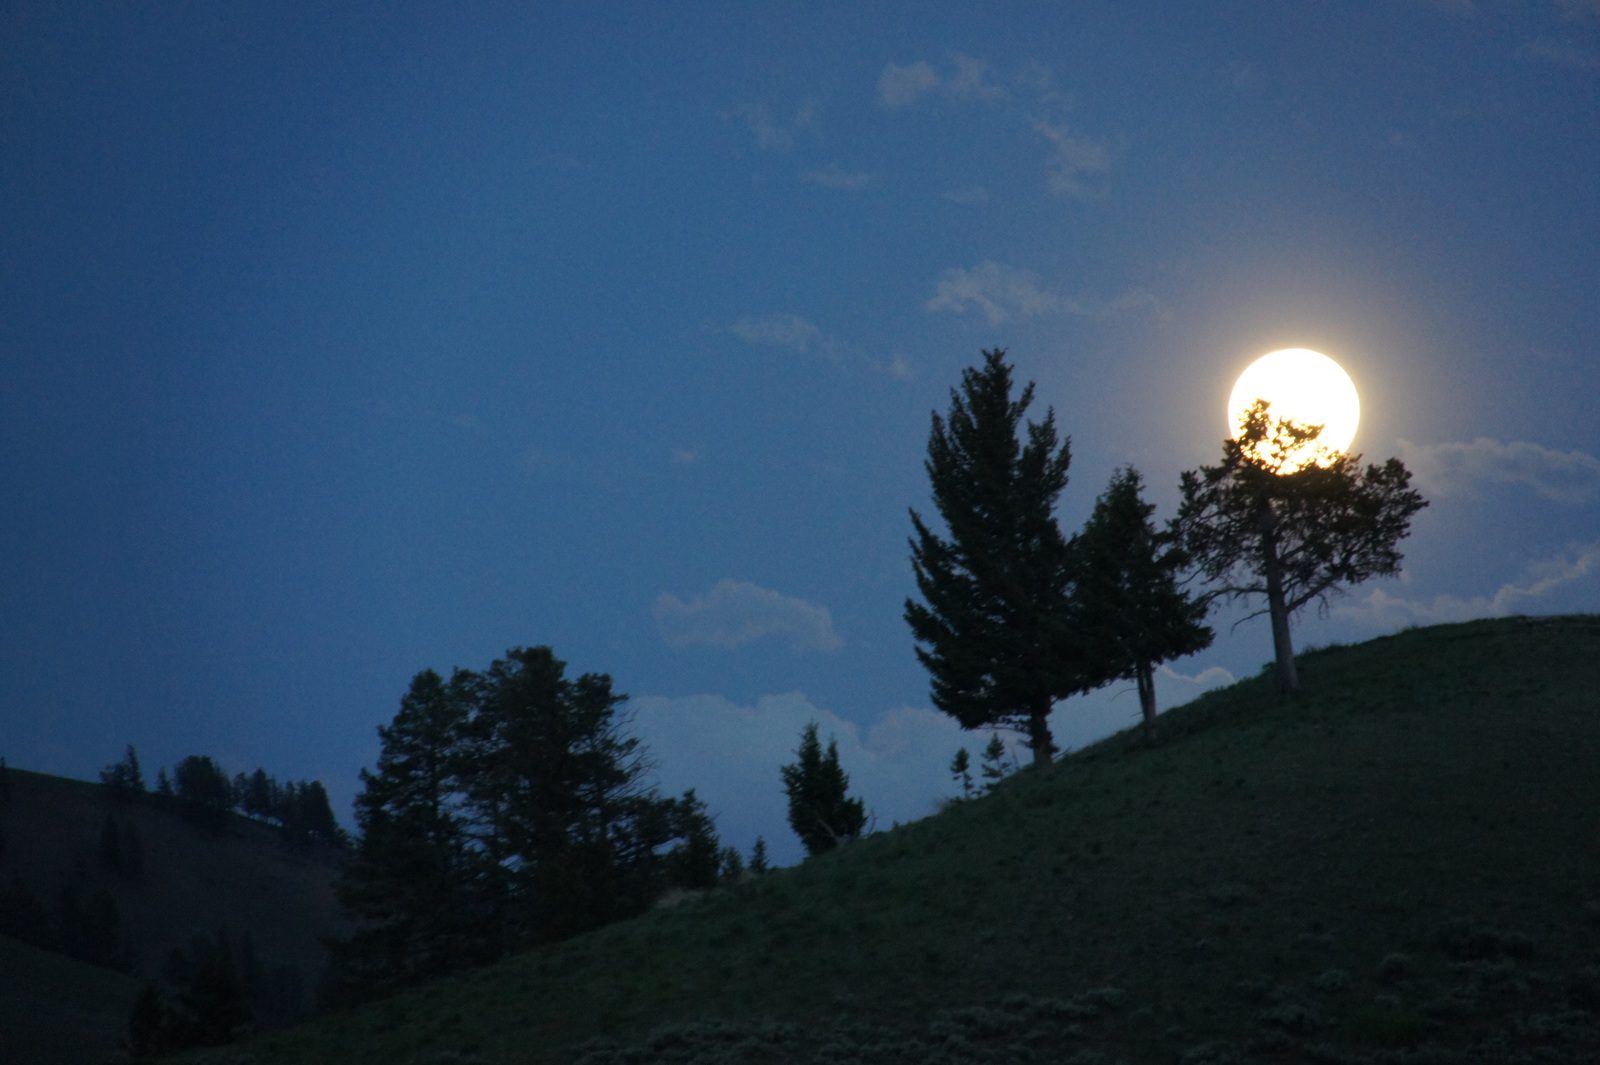 A full moon rises over Yellowstone.